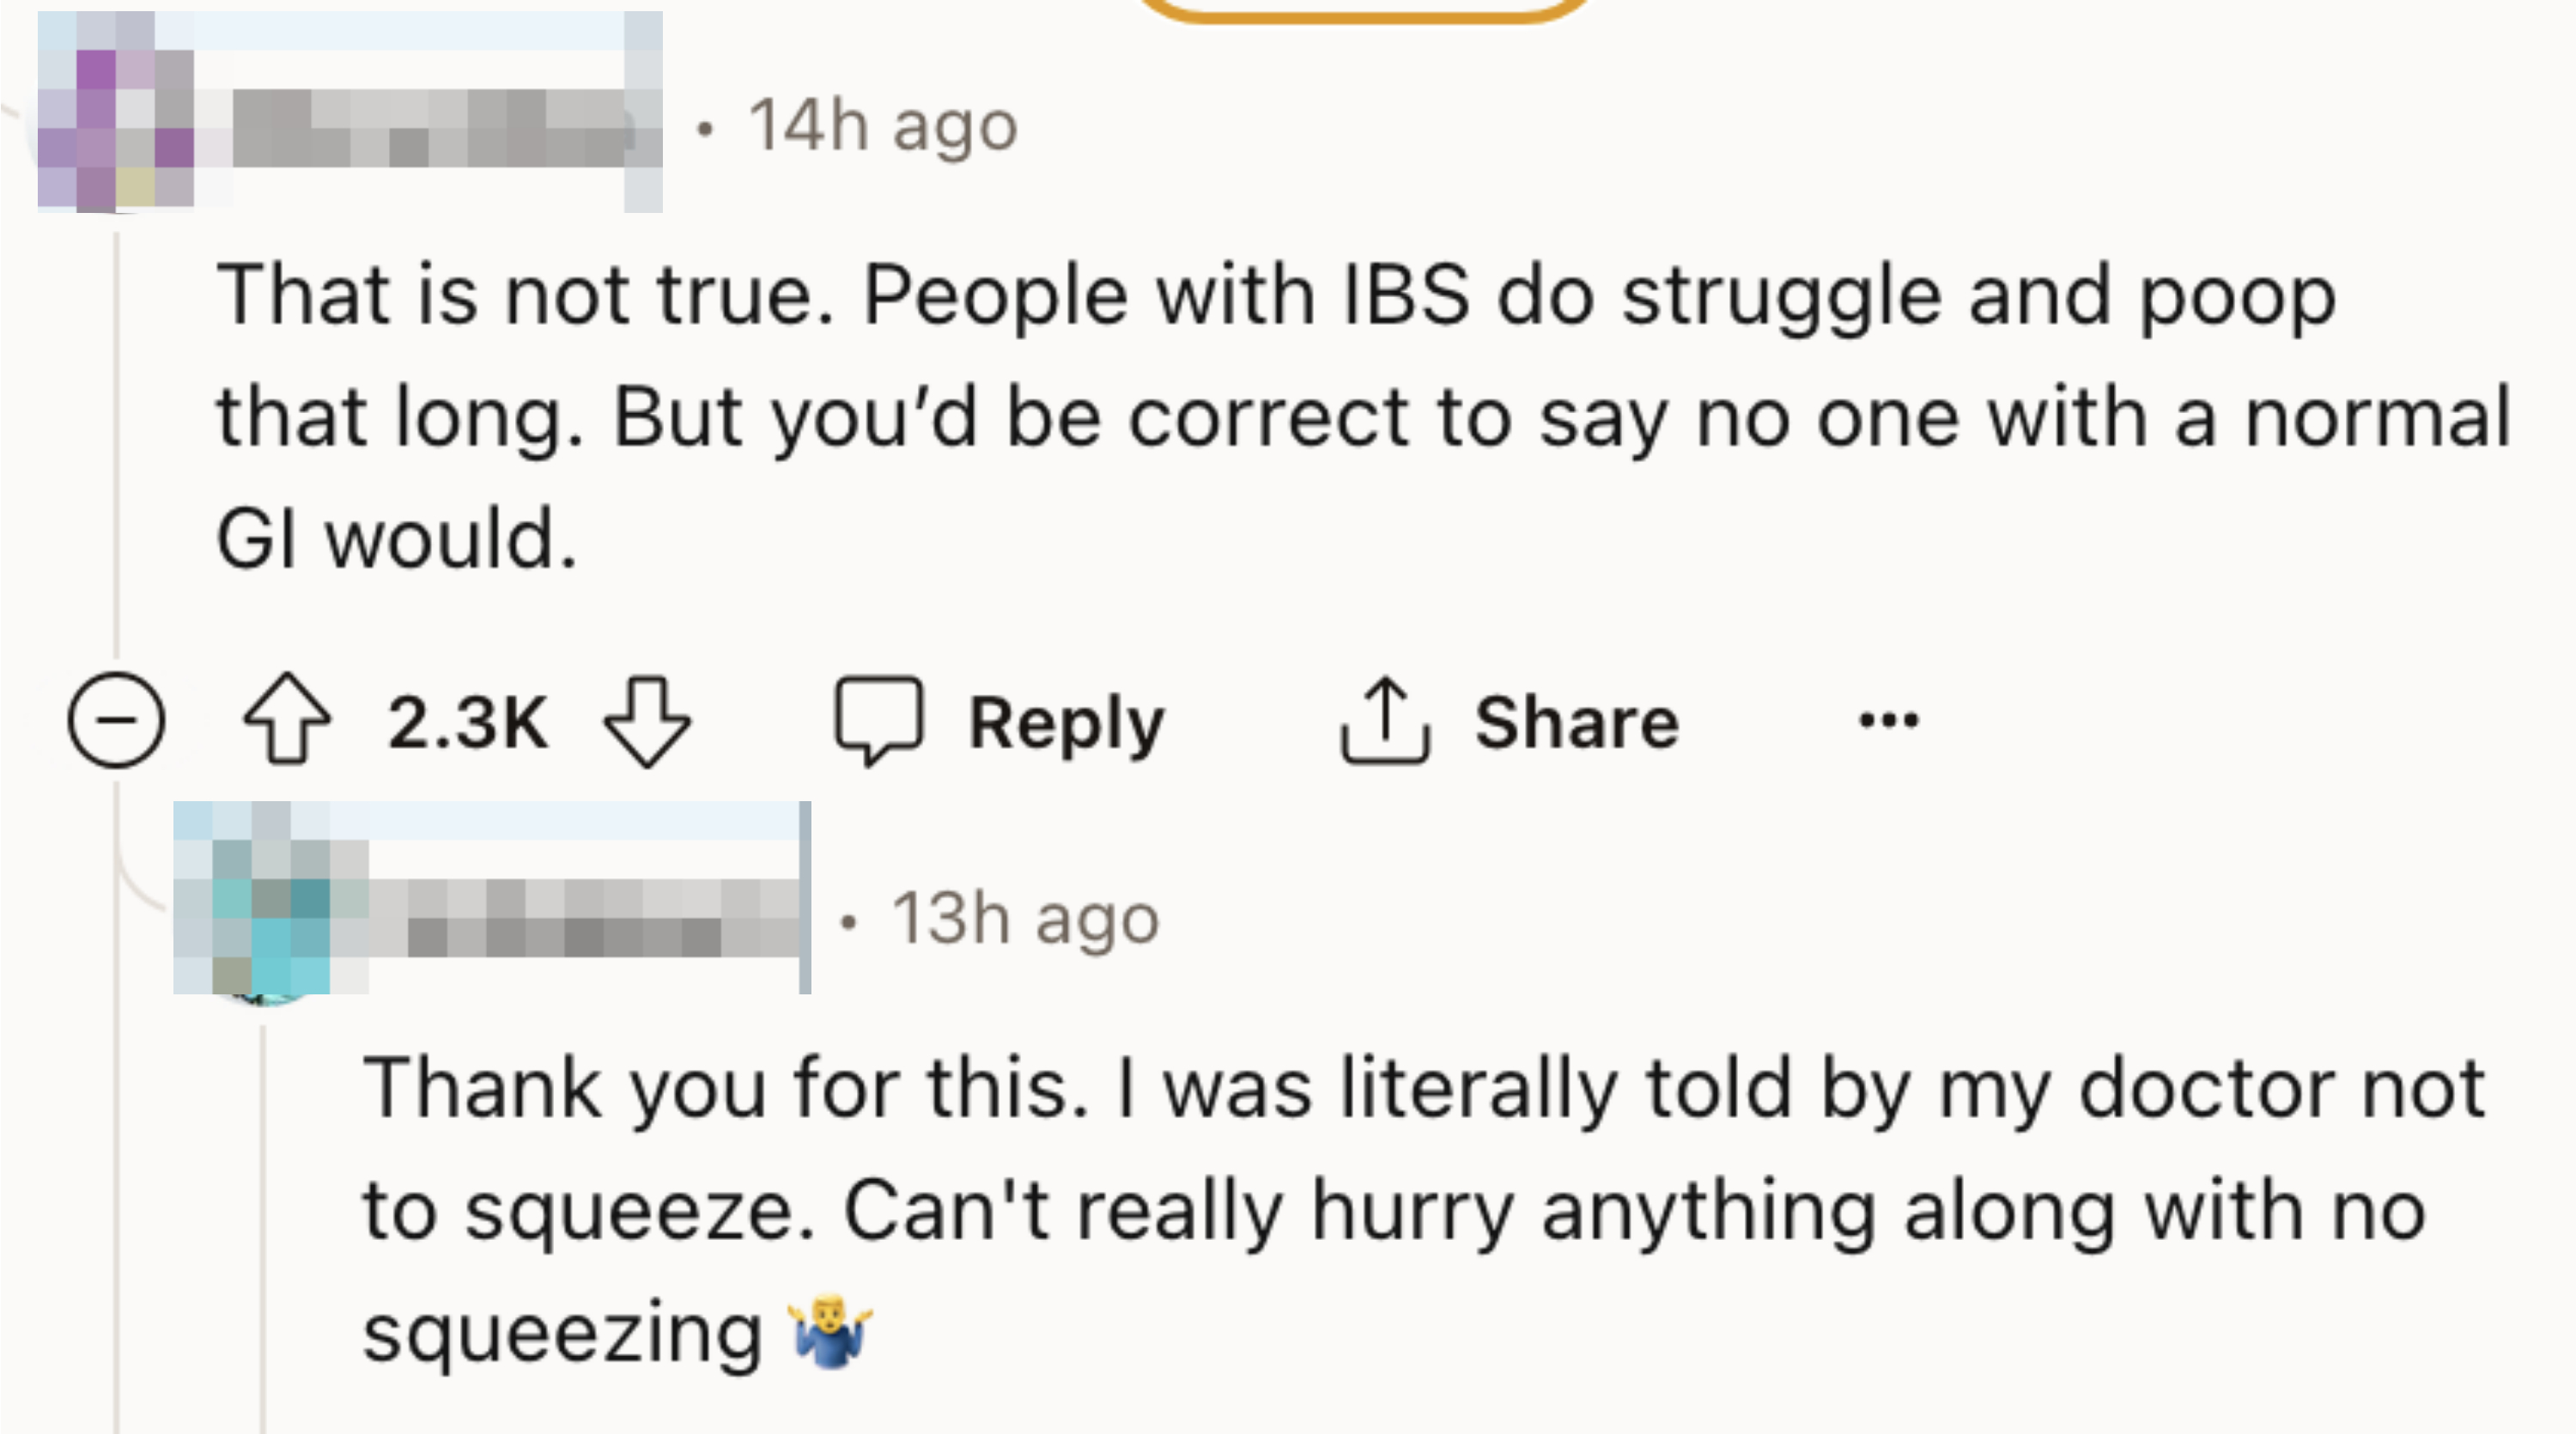 Comments arguing that people with IBS poop that long and that doctors tell you not to squeeze